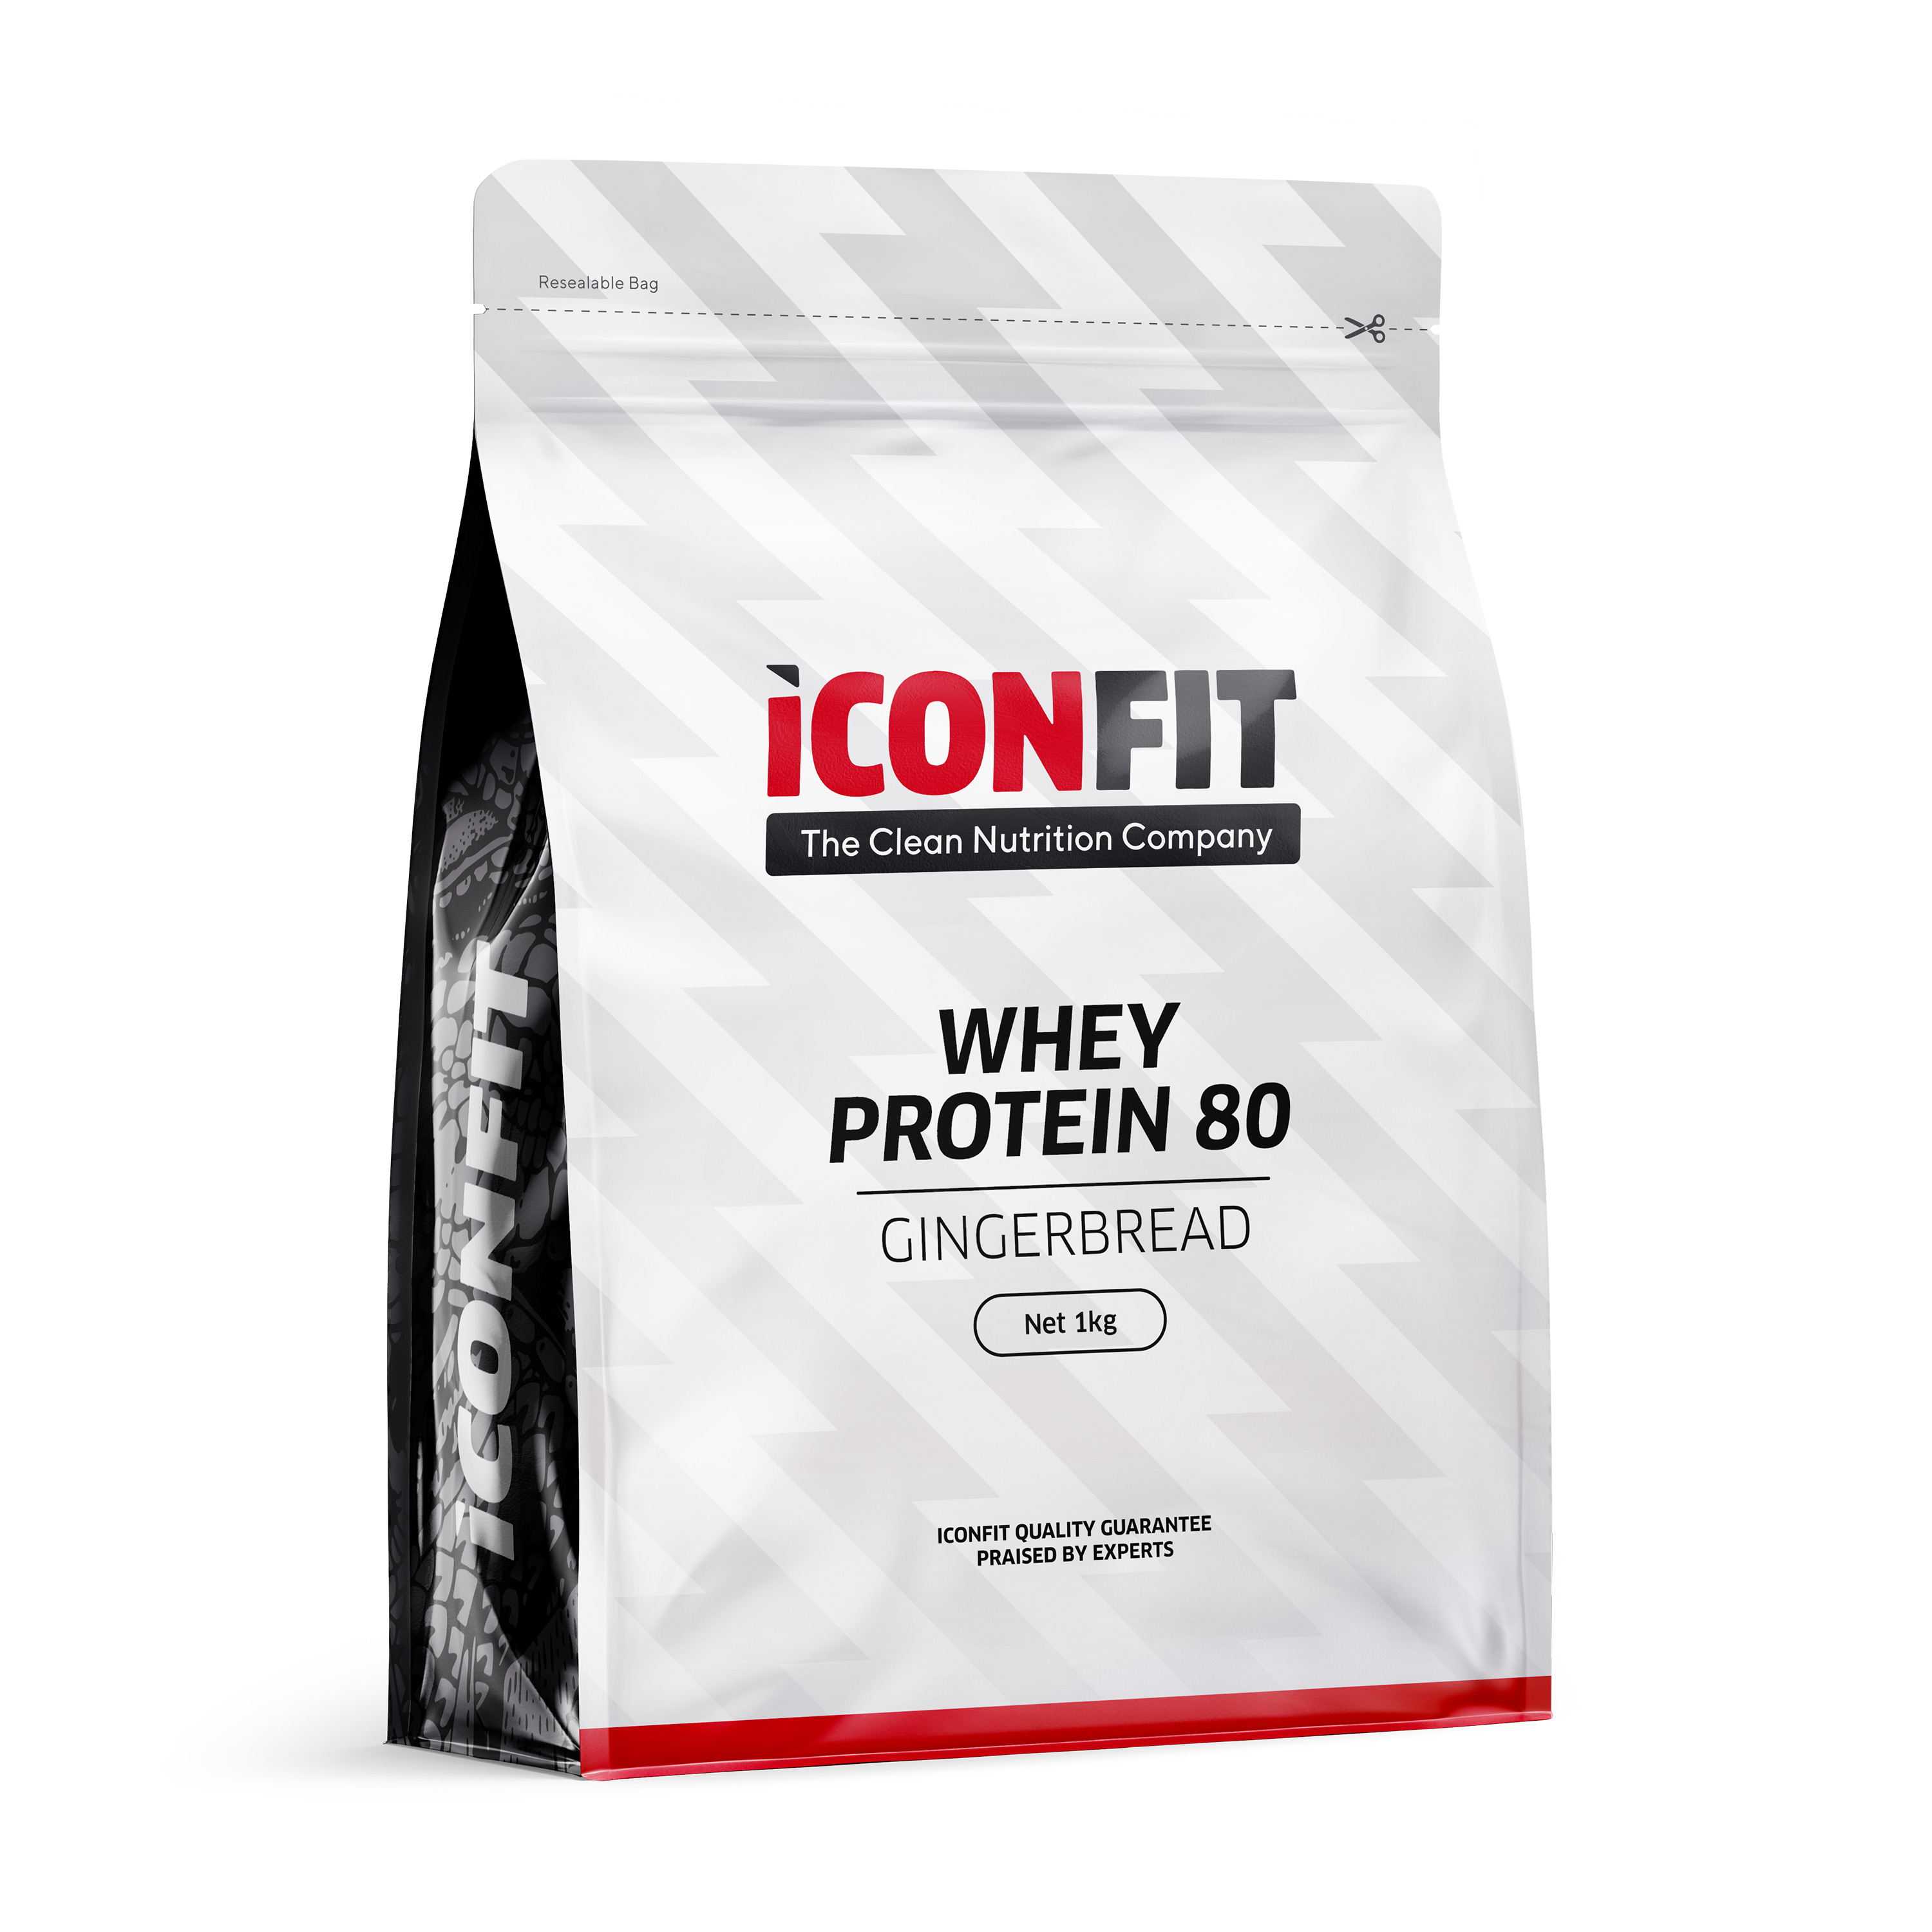 ICONFIT-WHEY-Protein-80-Gingerbread-1000g